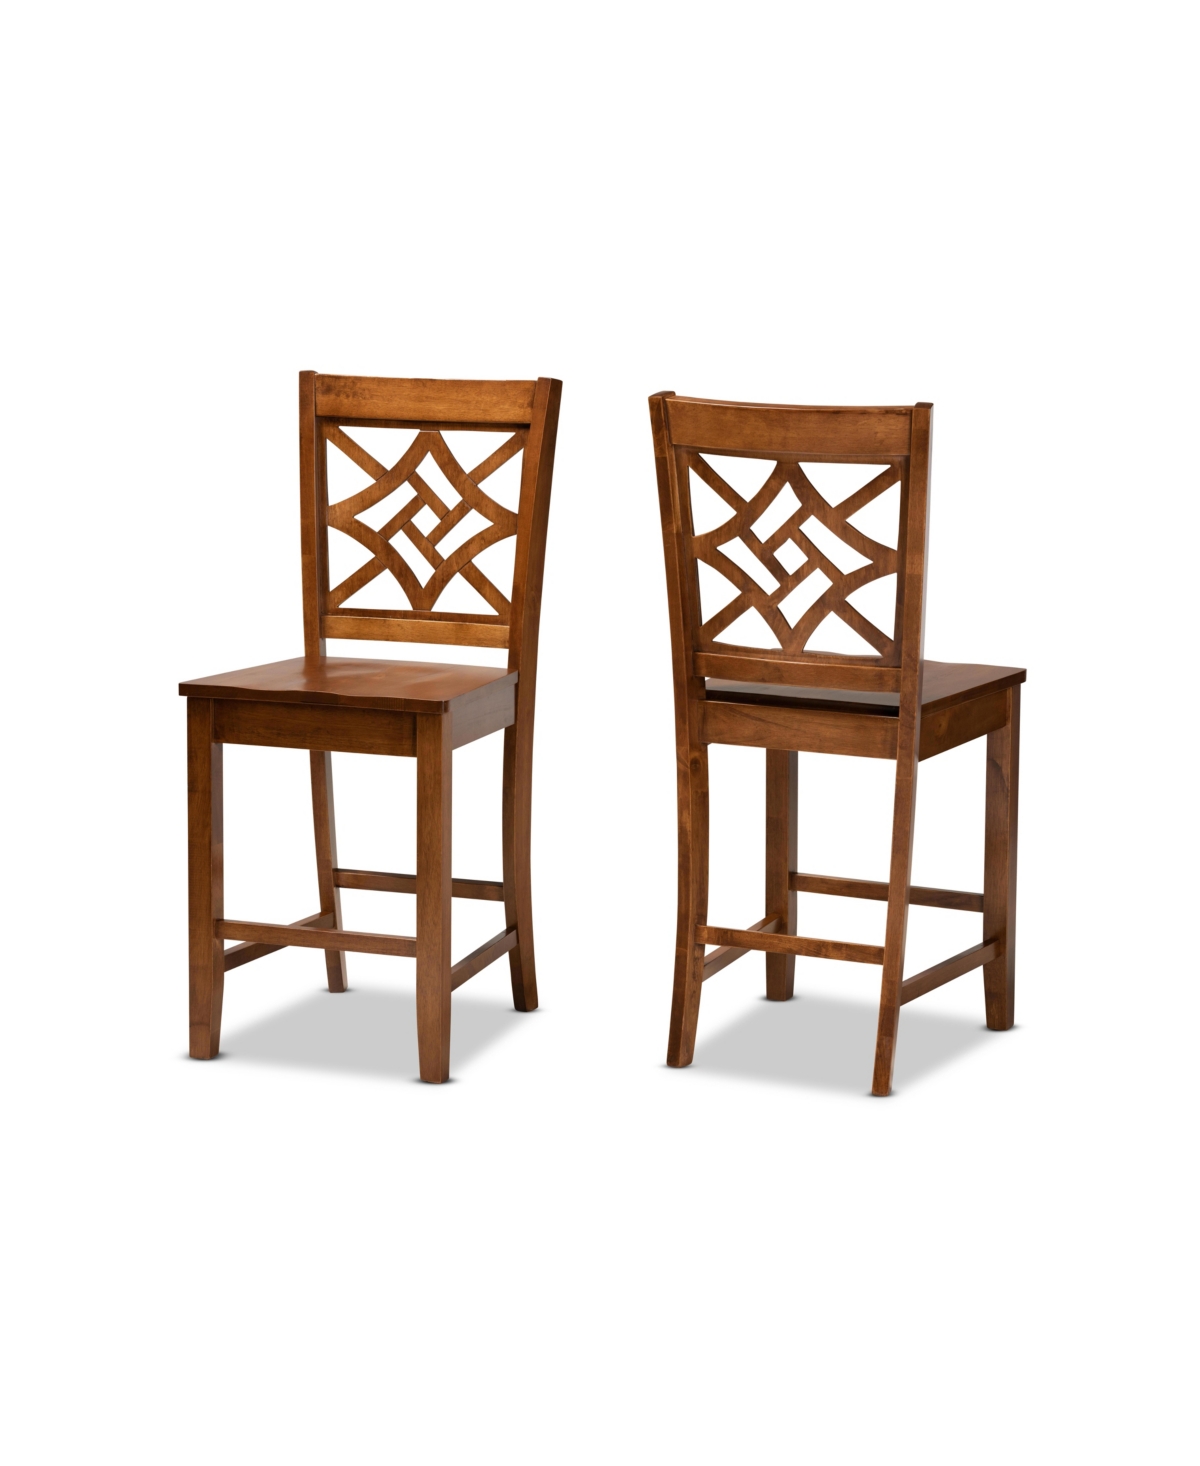 Baxton Studio Nicolette Modern And Contemporary Transitional Wood Counter Stool Set, 2 Piece In Walnut Brown